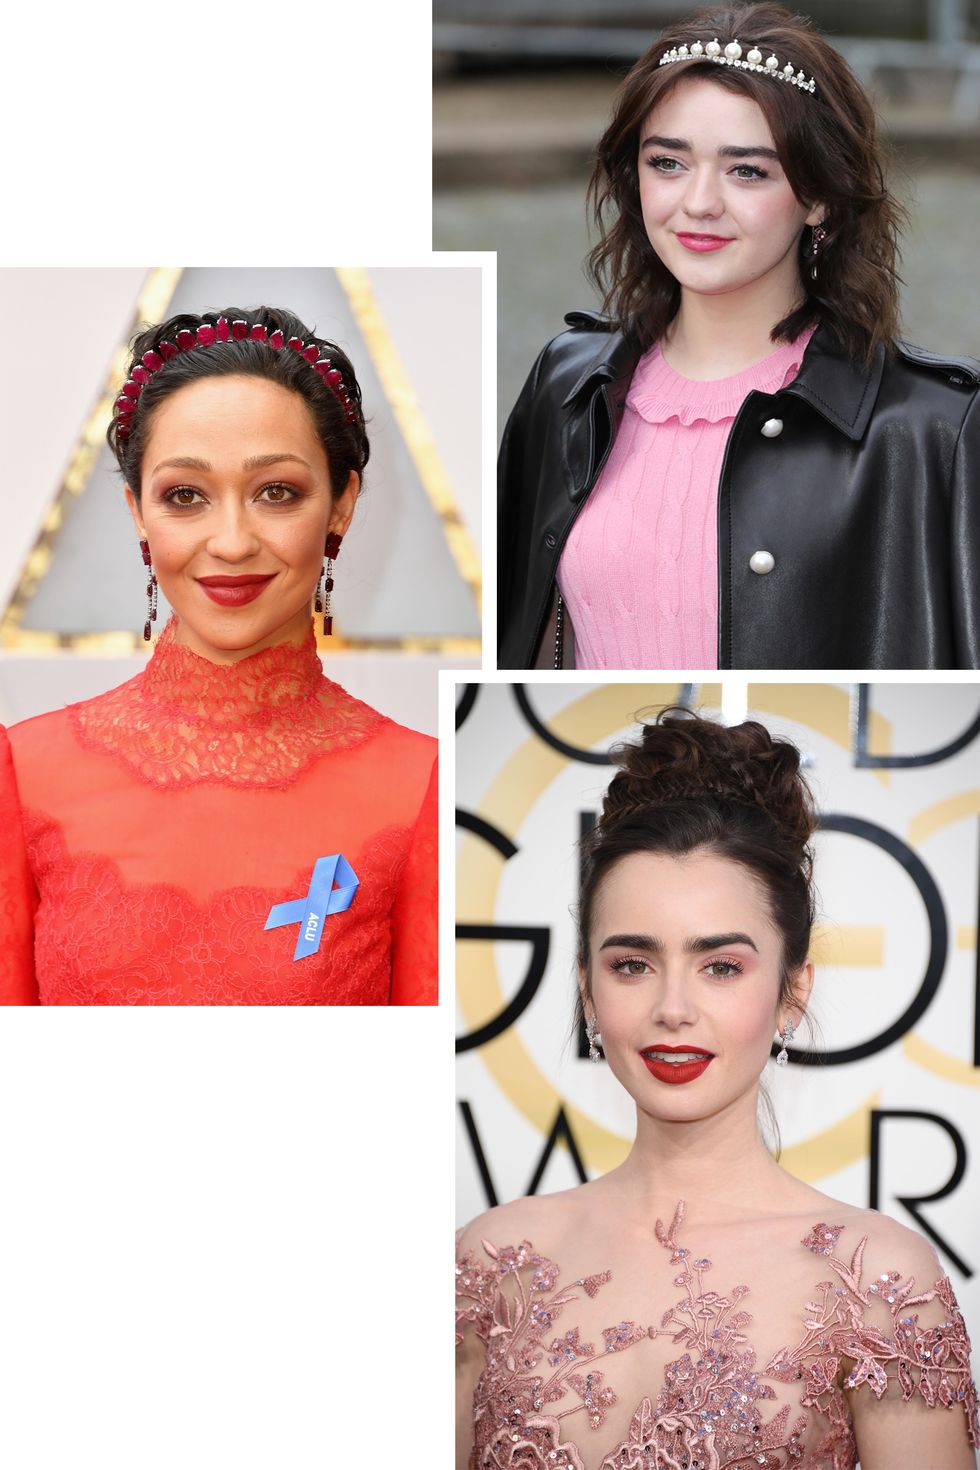 <p>Ruth Negga and Maisie Williams both wore sparkly tiaras on recent red carpets, while Lily Collins piled her hair into a braided updo for the <em data-redactor-tag="em" data-verified="redactor">Golden Globes </em>that served-up major cinematic princess vibes. </p>